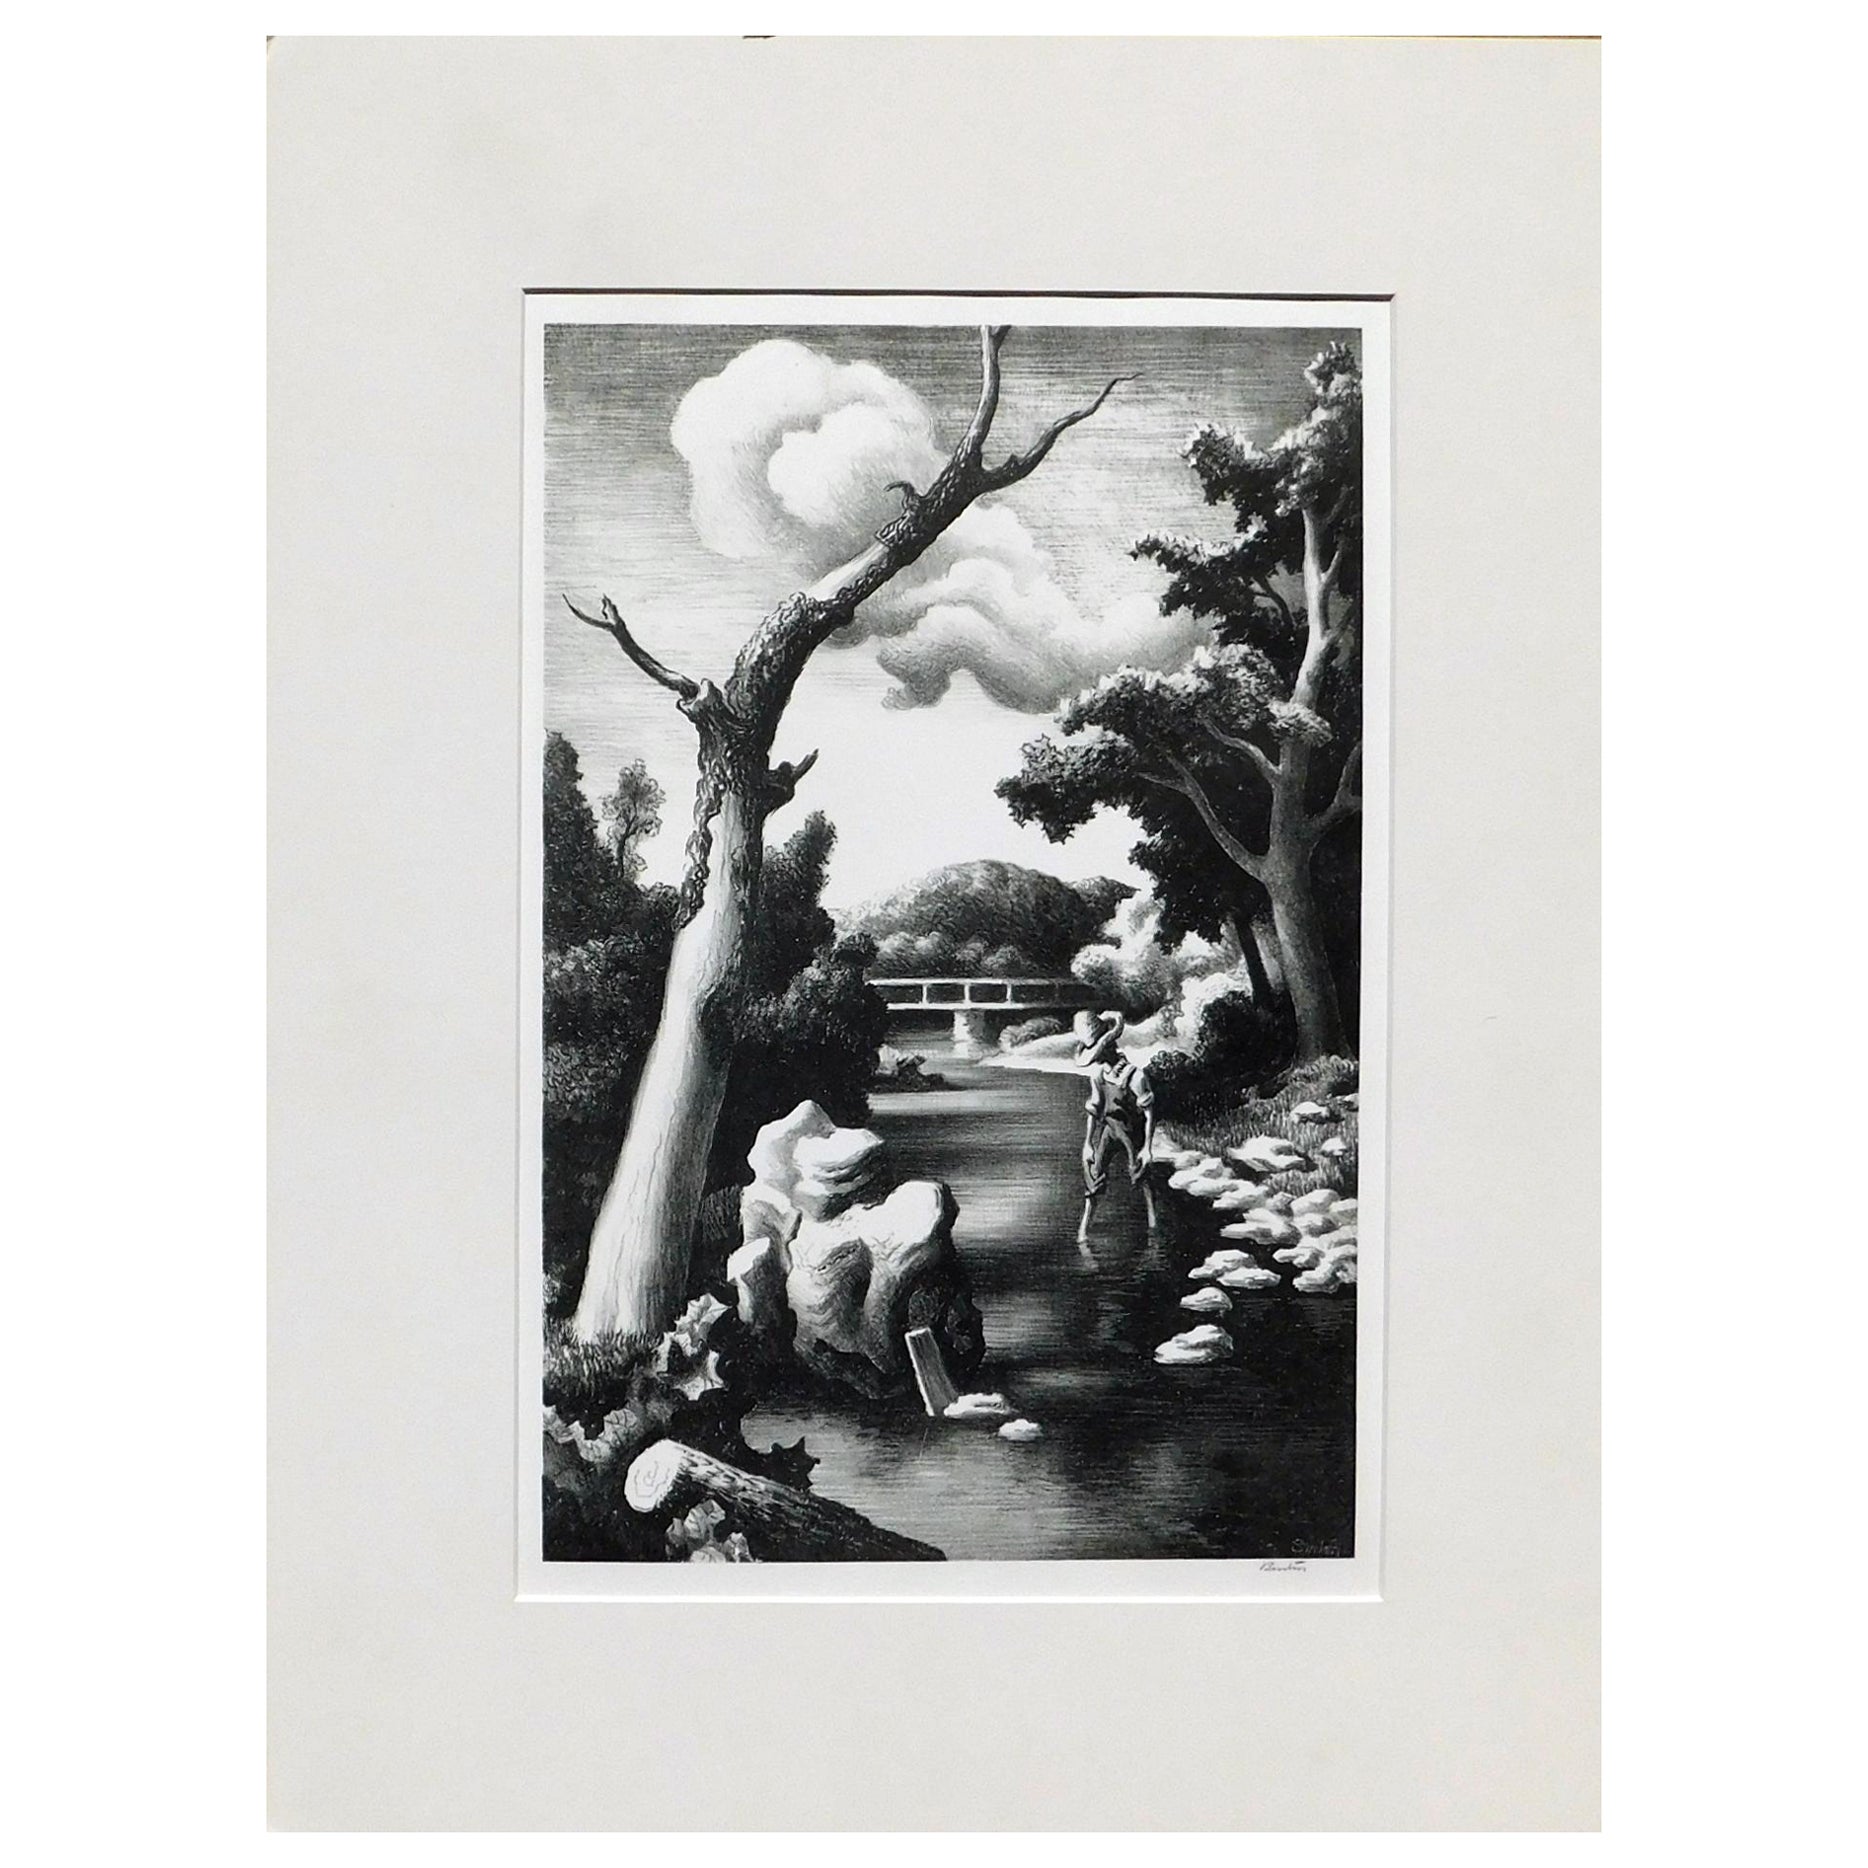 Original stone lithograph by well-known Regionalist Thomas Hart Benton (1889-1975).
Titled: 